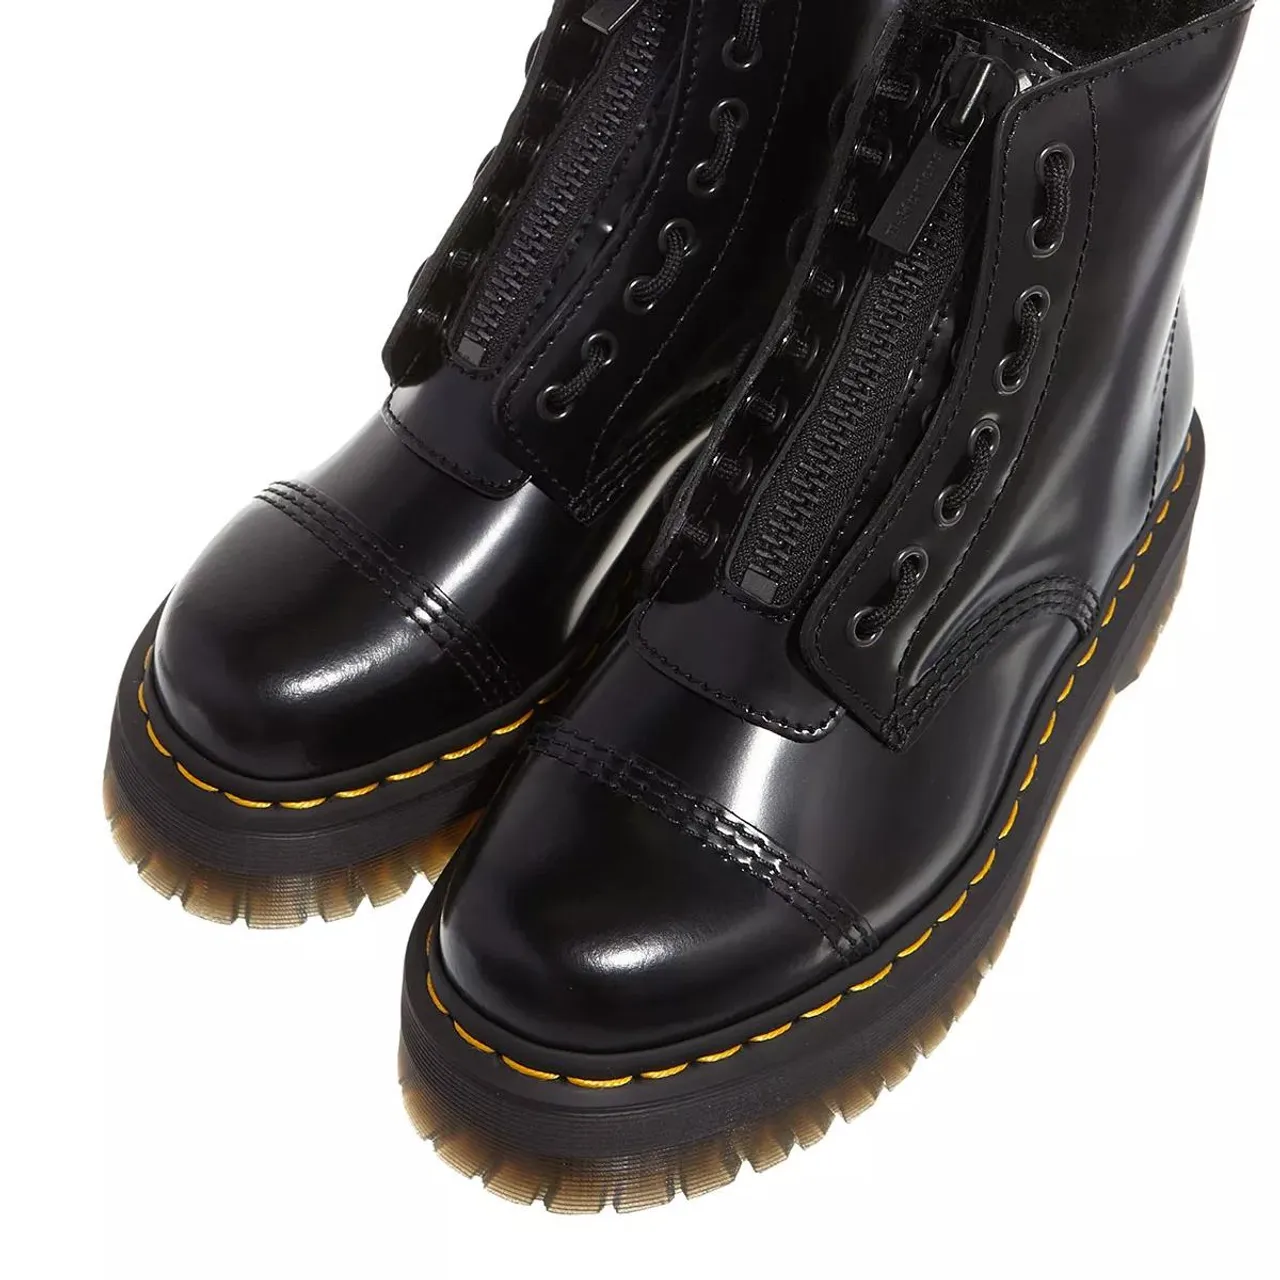 Dr. Martens Boots & Ankle Boots - Sinclair FL - black - Boots & Ankle Boots for ladies